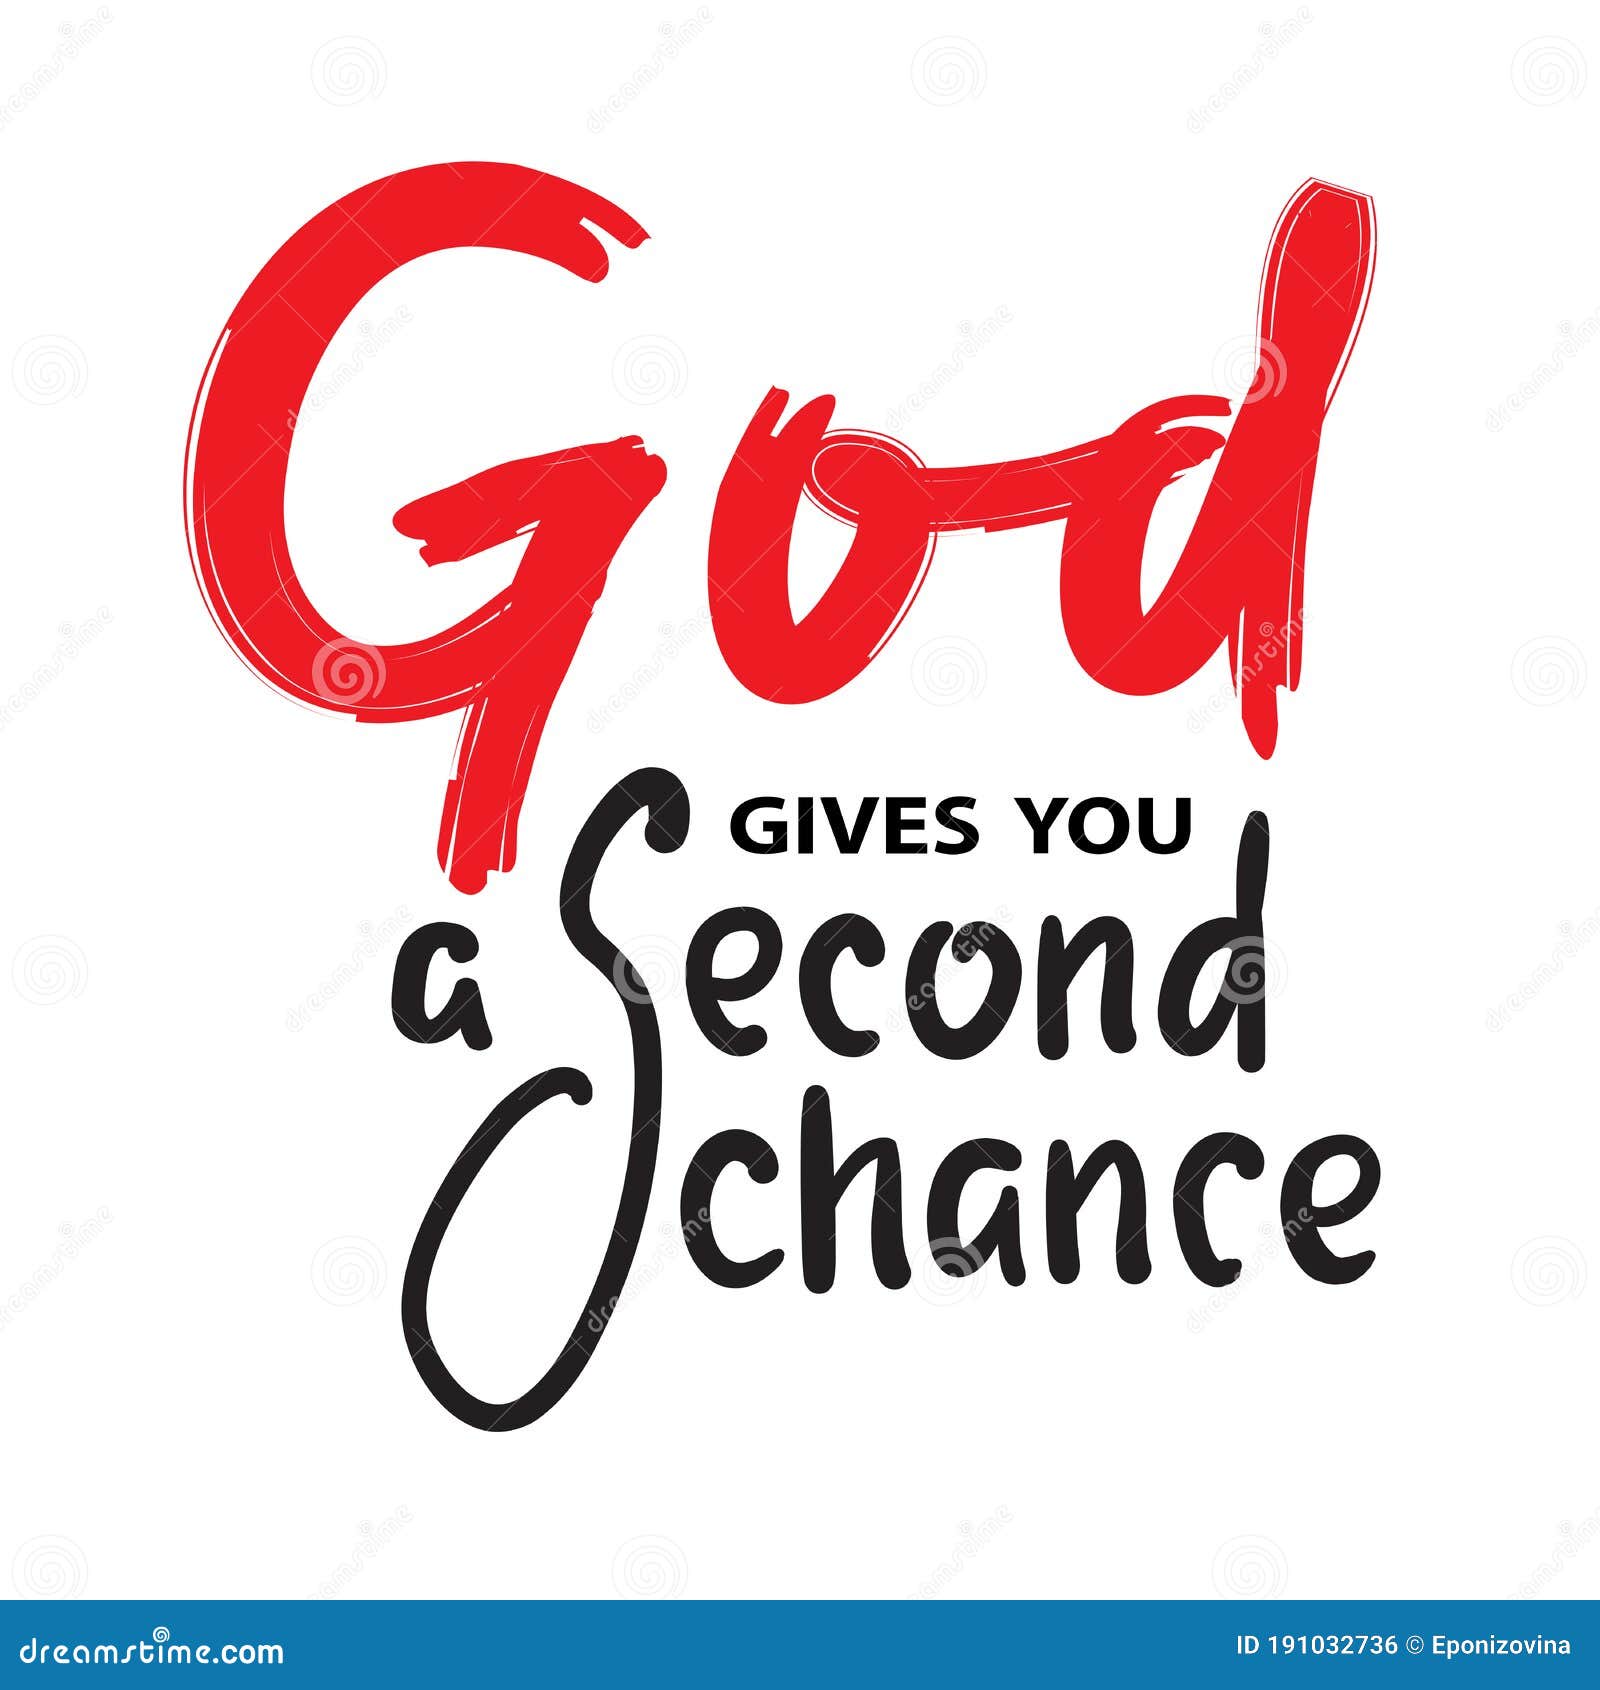 god gives you second chance - inspire motivational religious quote. hand drawn